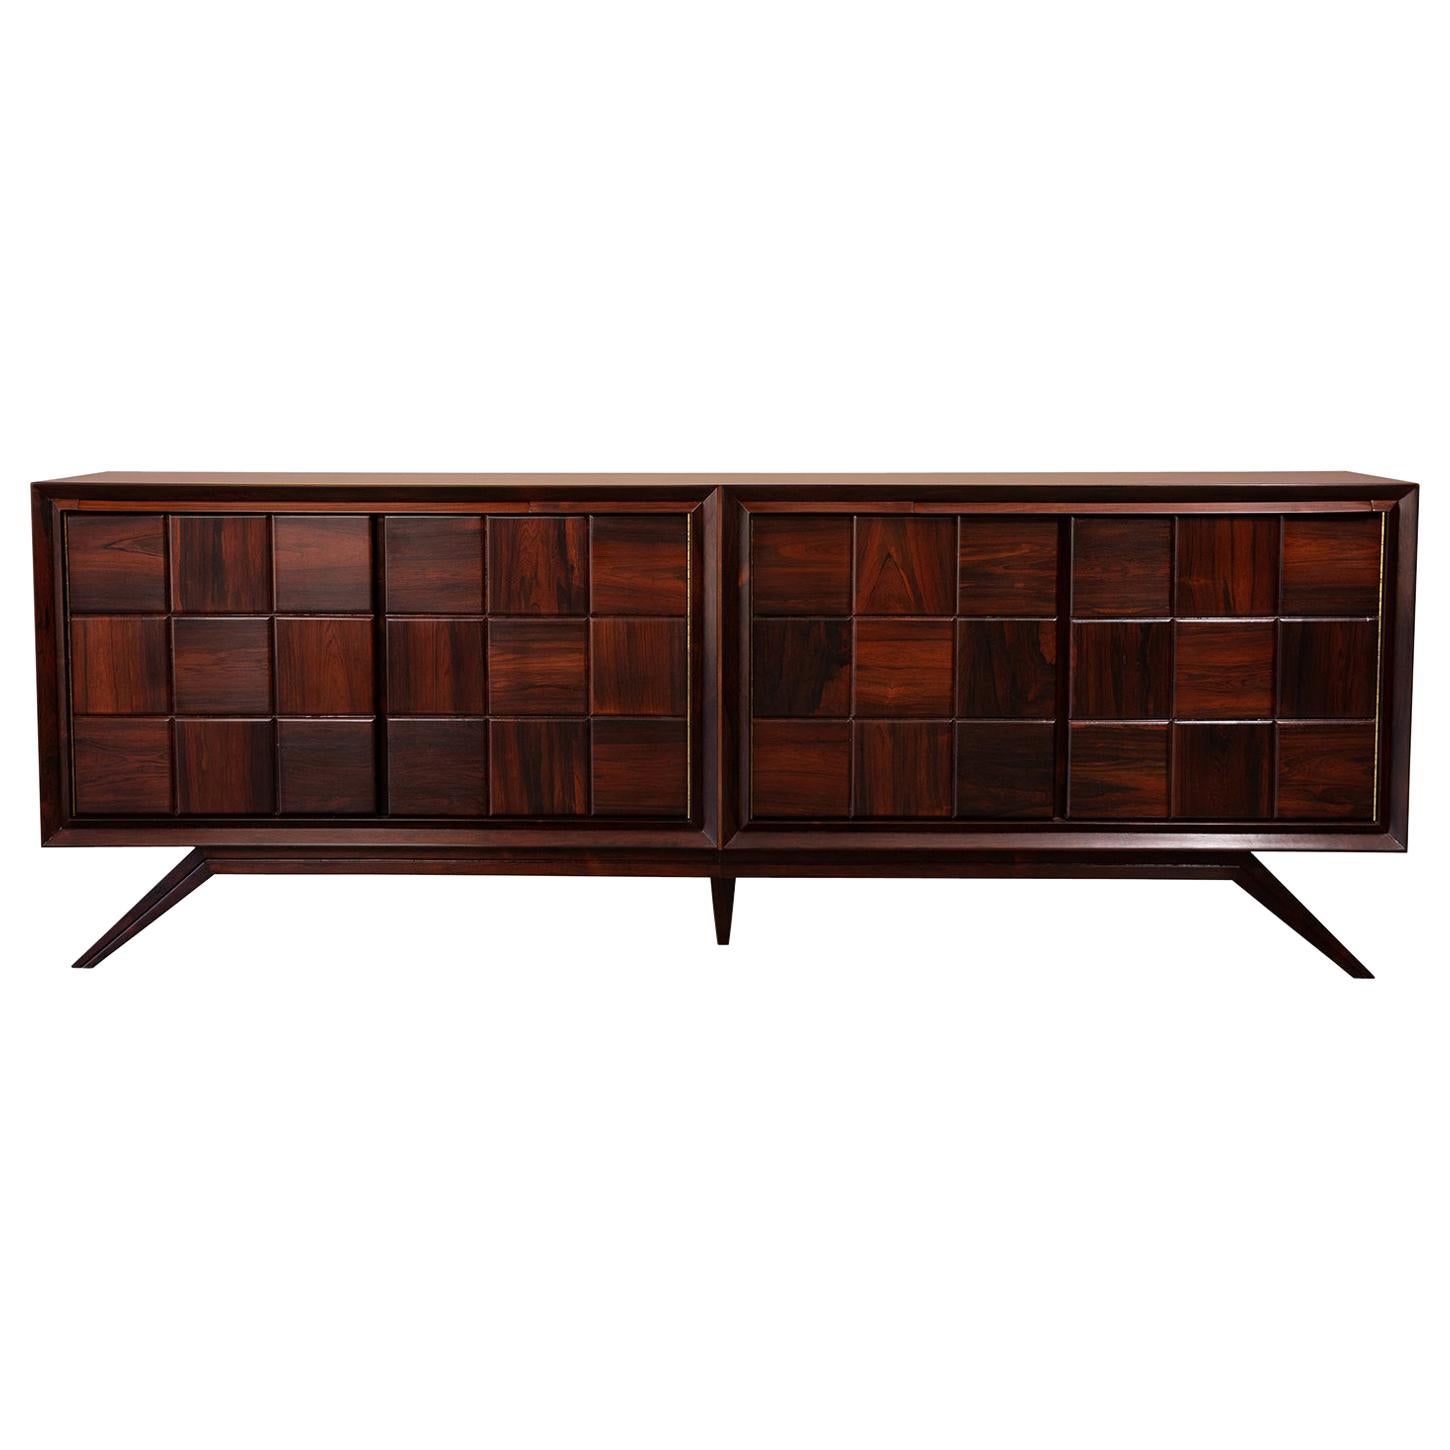 Solid Rosewood & Brass Sideboard or Credenza